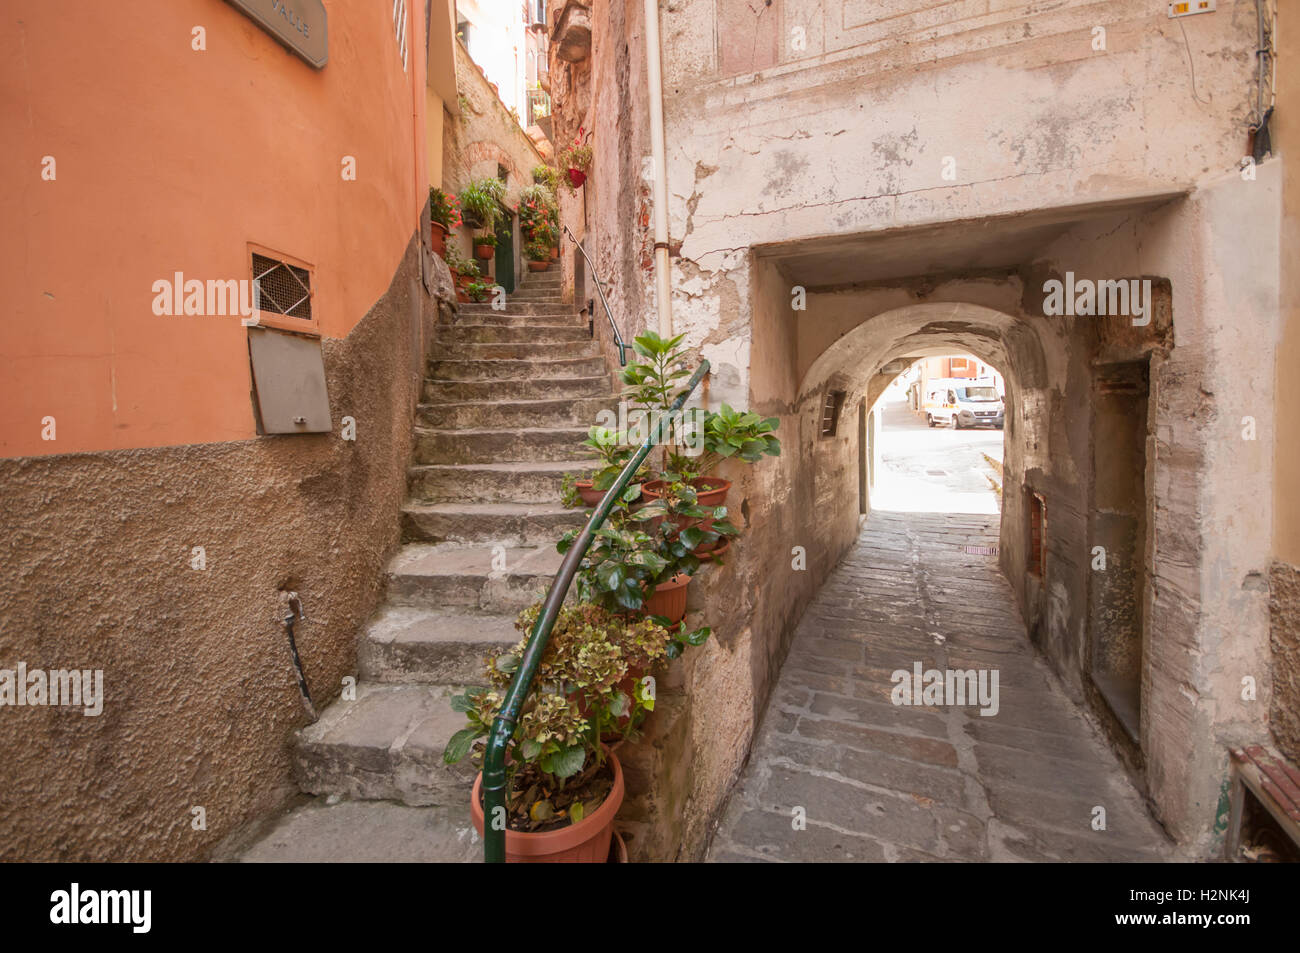 An example of the narrow walkways that are typical of mediterranean villages, Riomaggiore, Cinque Terre, Liguaria, Italy, Stock Photo